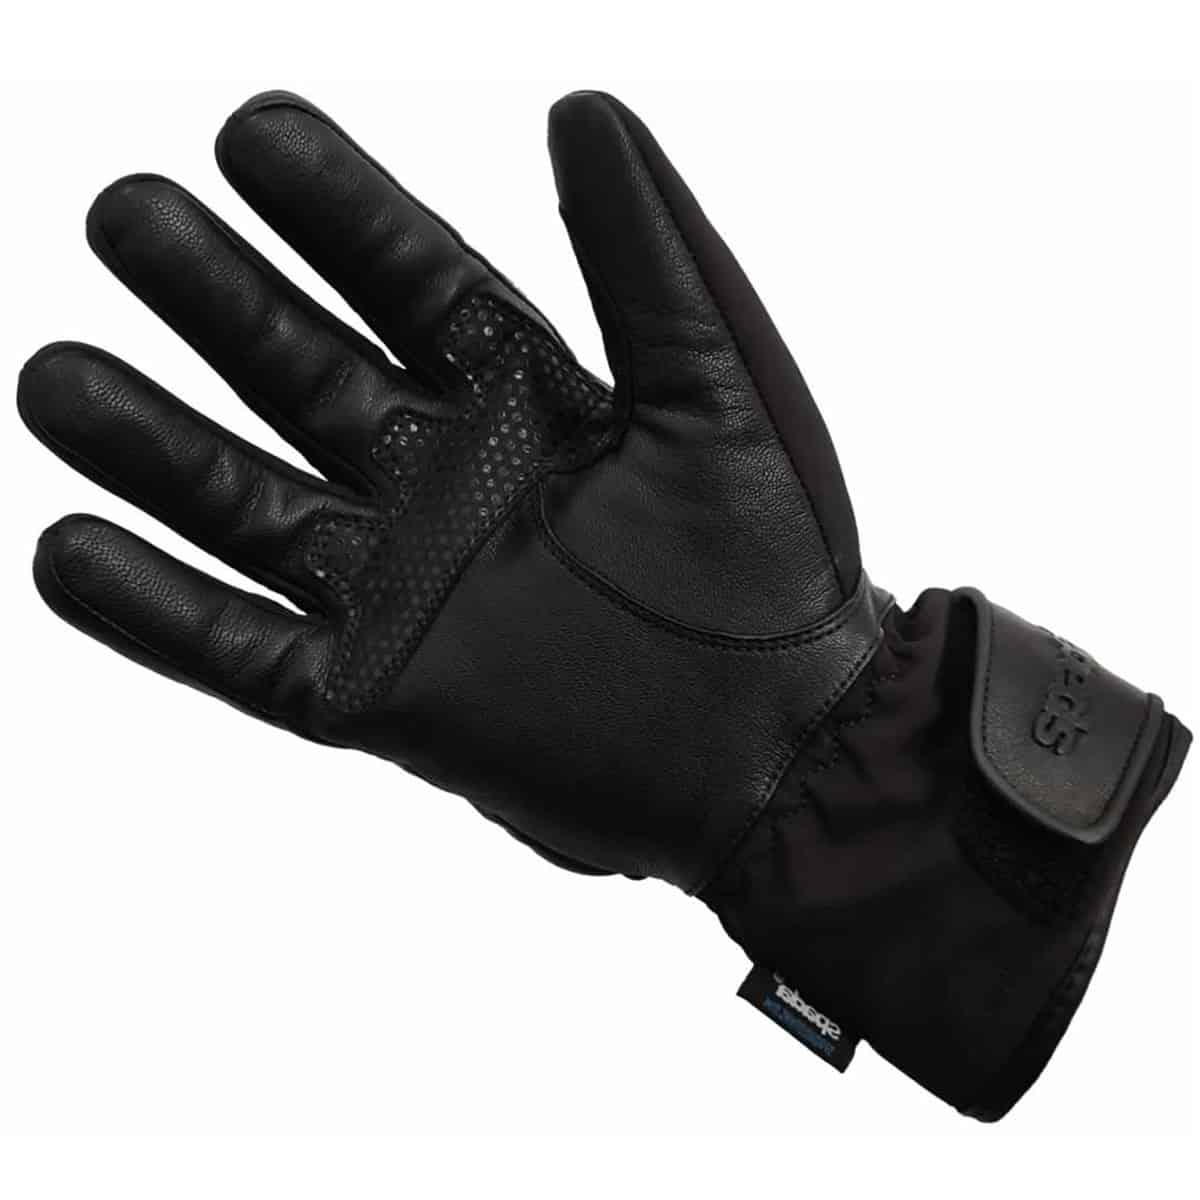 Spada Oslo WP Gloves: Waterproof gloves with additional warmth-1